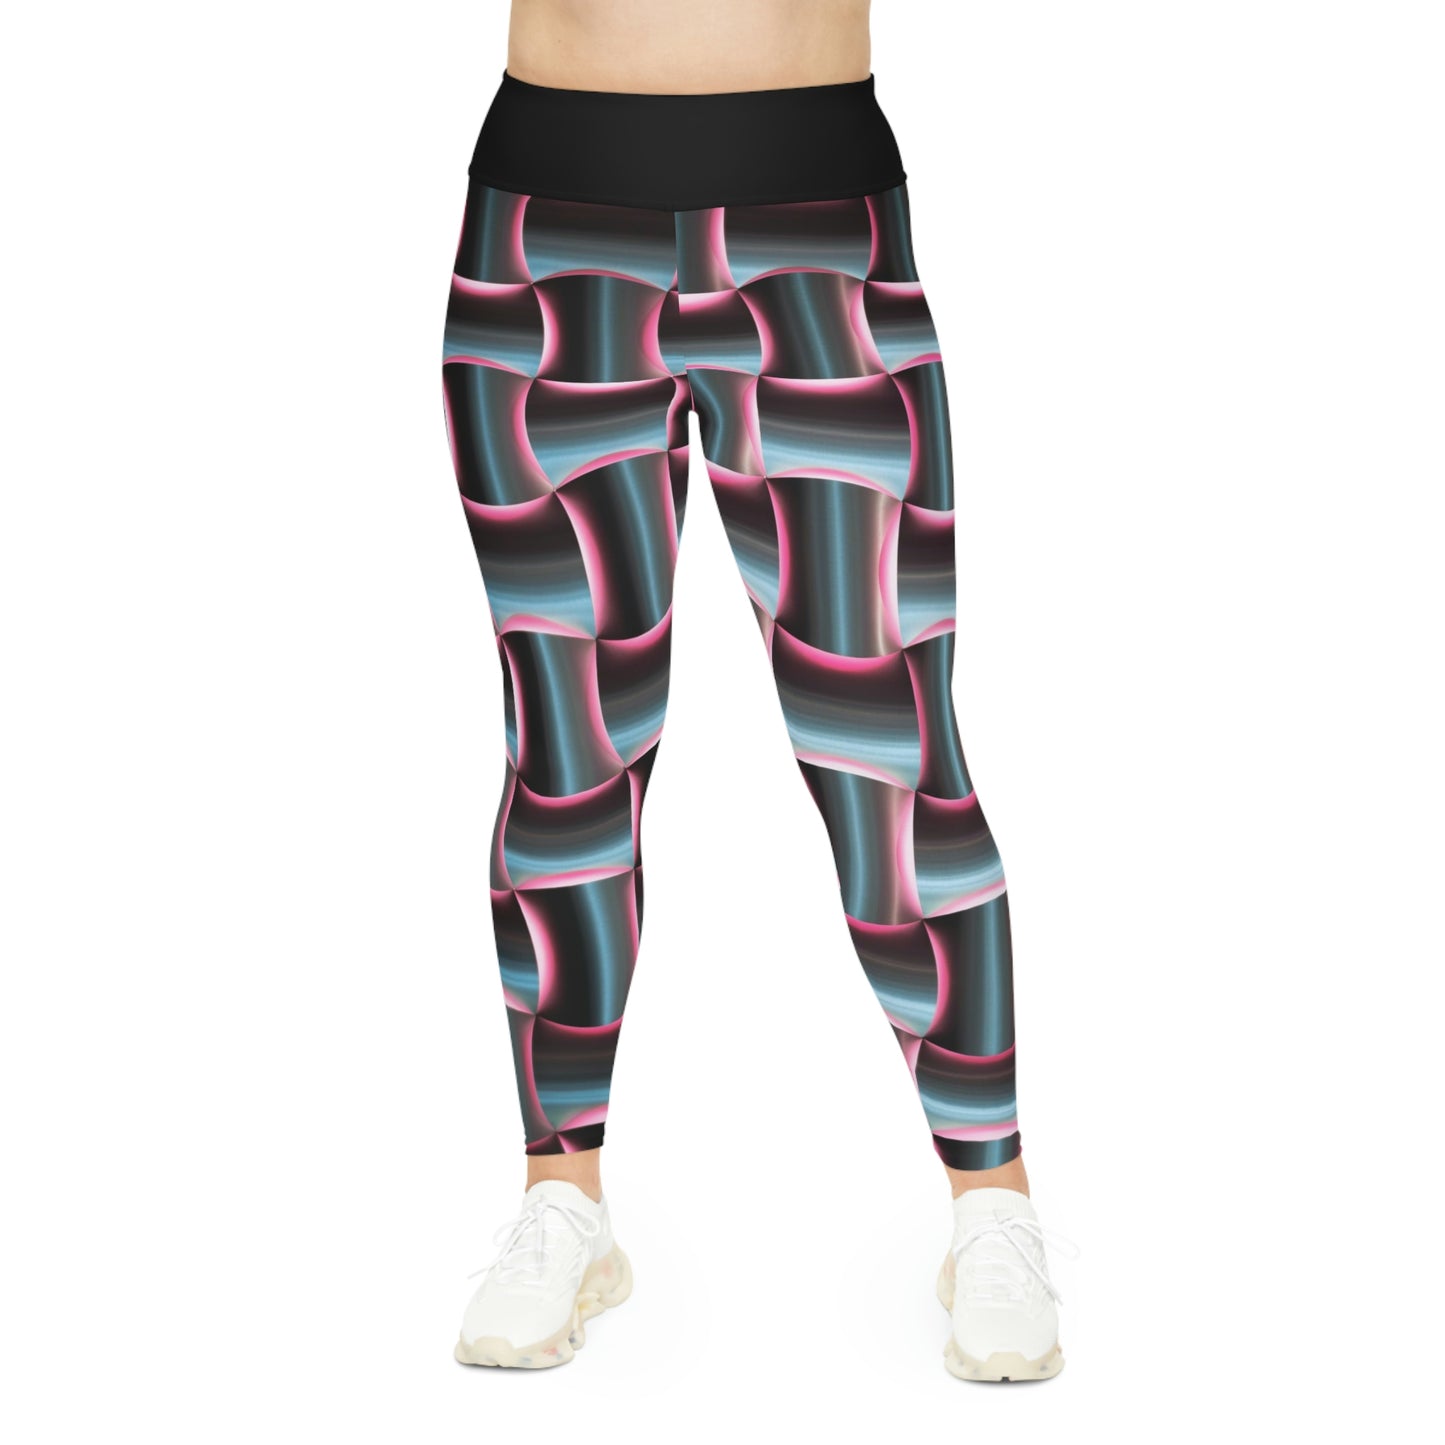 Robot Plus Size Leggings Plus Size Leggings One of a Kind Gift - Unique Workout Activewear tights for Mom fitness, Mothers Day, Girlfriend Christmas Gift